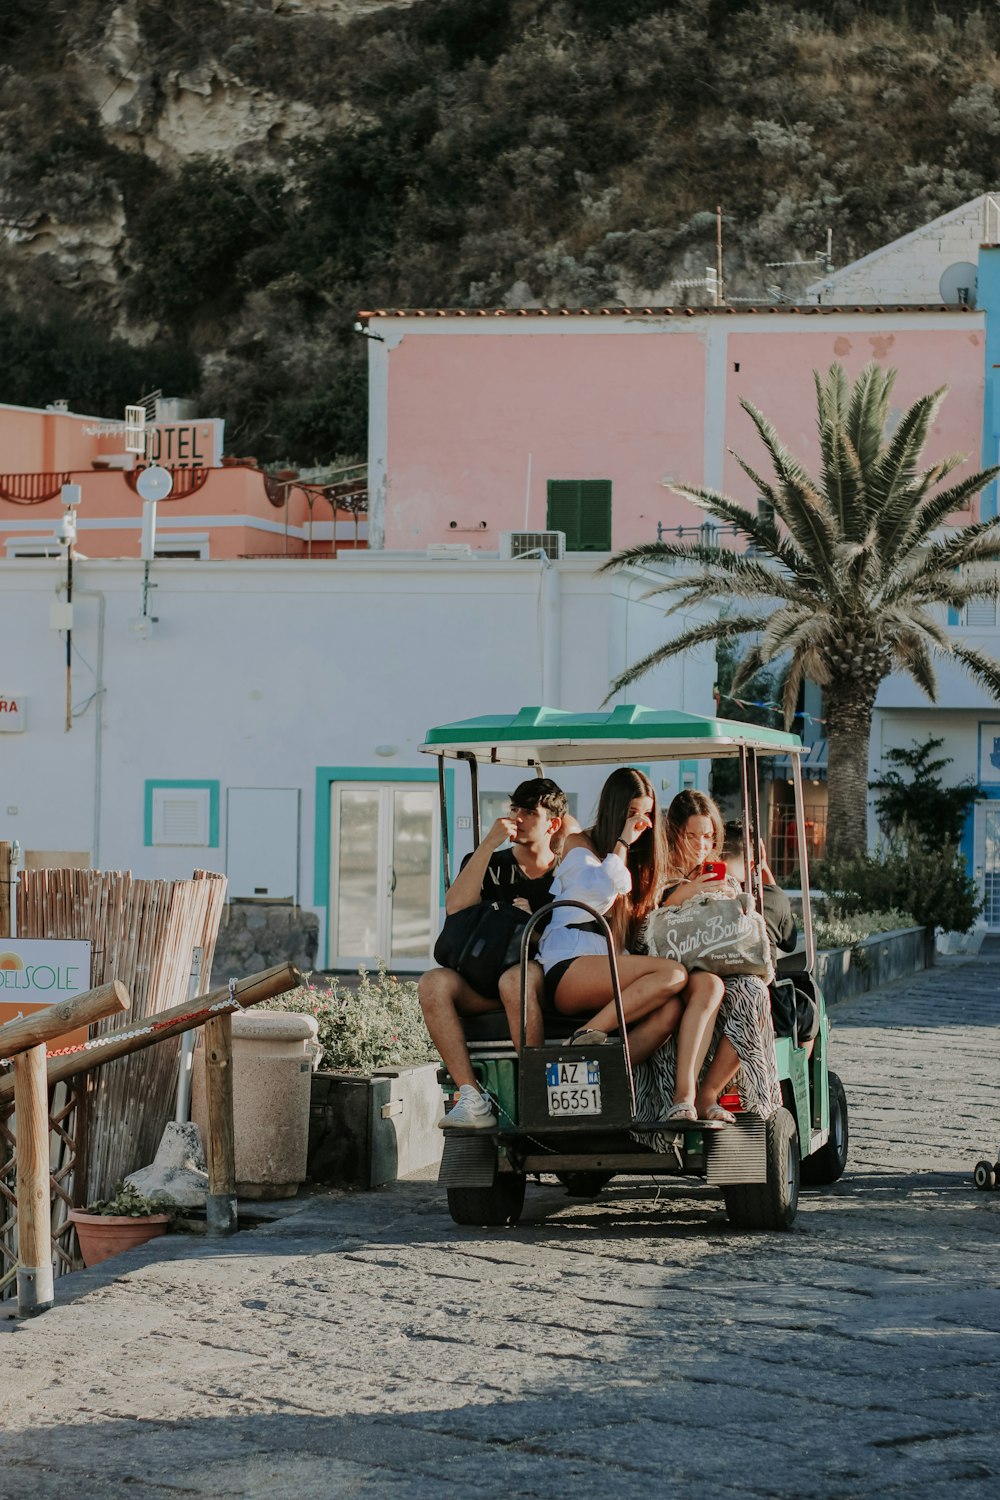 a group of people riding on the back of a golf cart